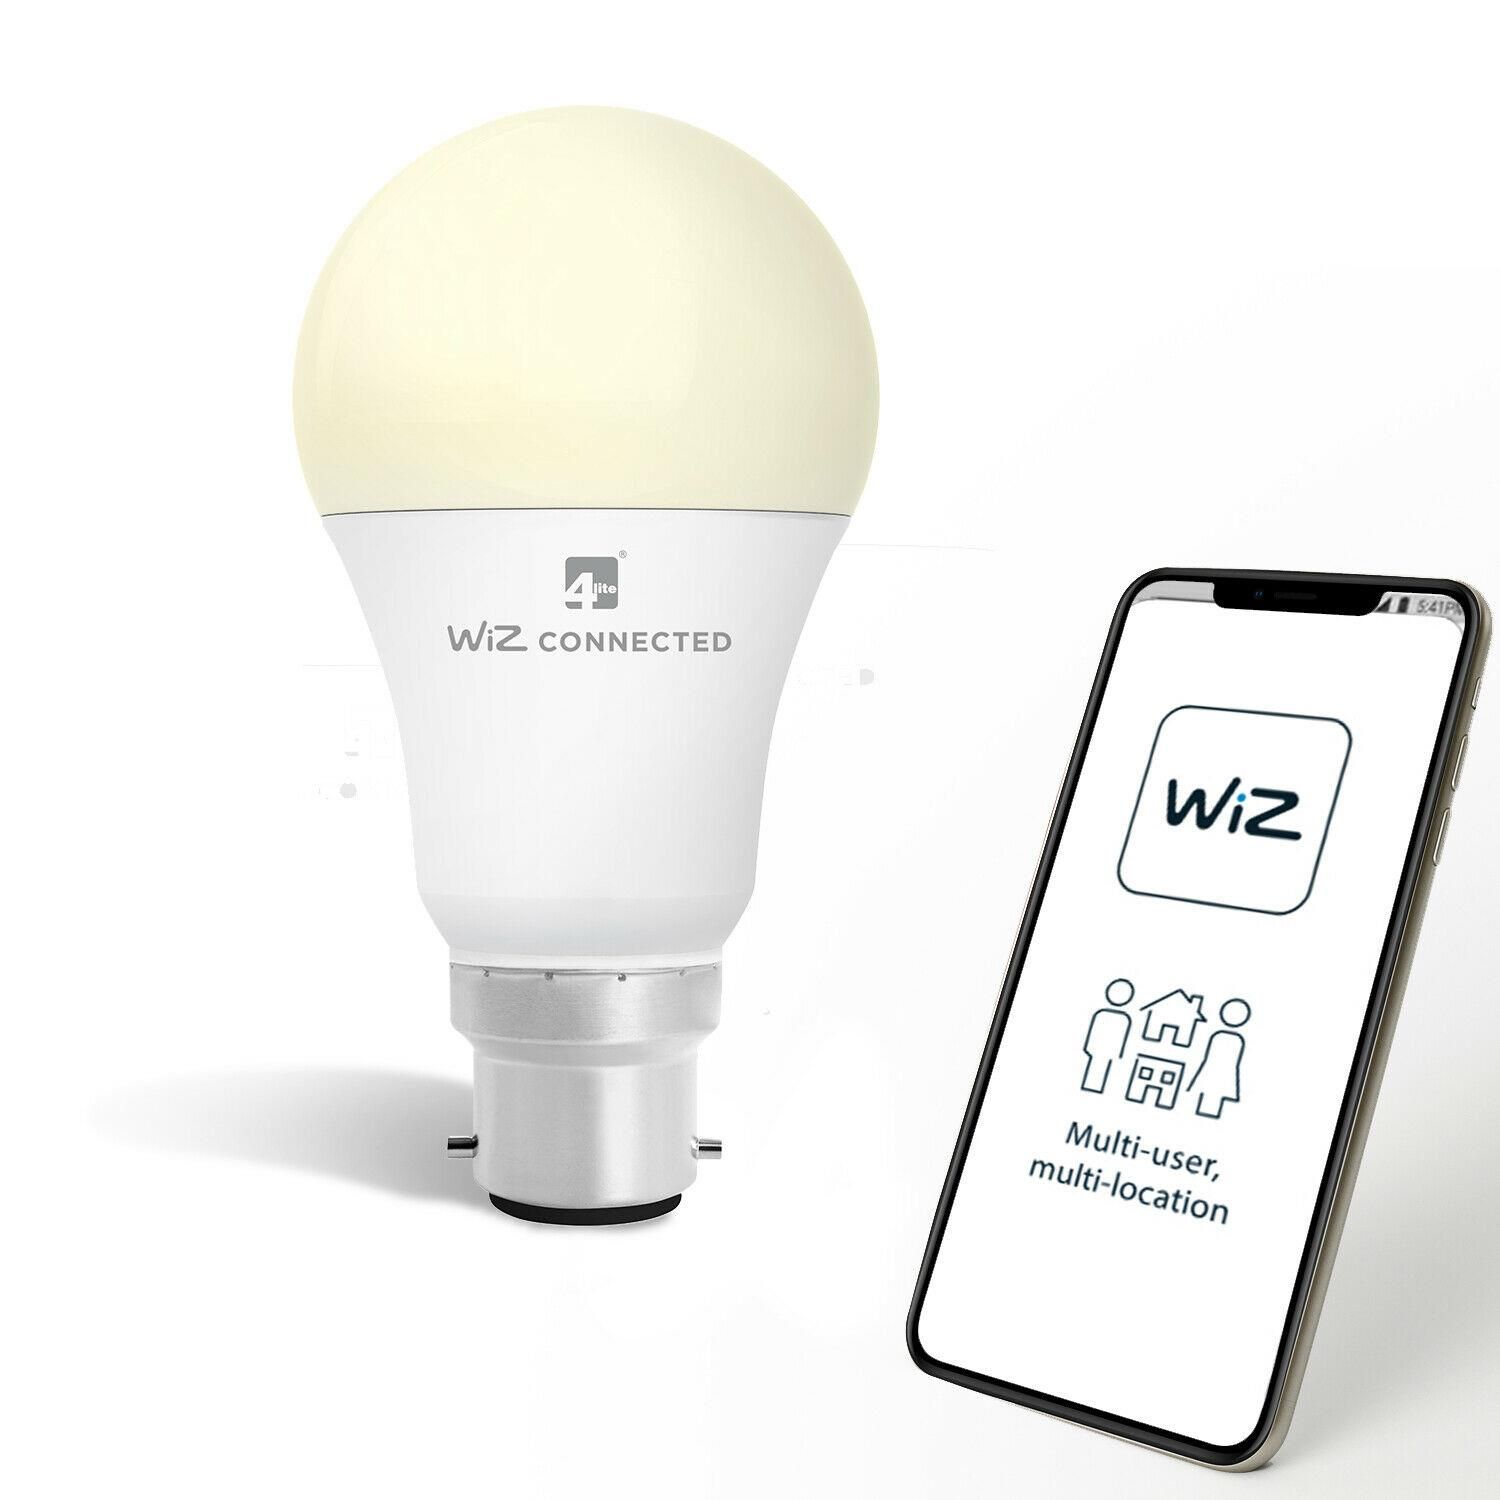 WiZ LED A60 Smart Bulb Wifi BC (B22) Warm White & Dimmable, 3 Pack
Bring human-centric lighting into your living and working environments with this smart LED A60 whites bulb. Retrofit into any lamp shade and choose the lighting conditions which suit you best from a wide range that starts with soft warm white and ends with bright daylight. Wi-Fi connected.

Experience the ideal lighting in your home at any time of the day or night. Download the easy-to-use app via the Google Store or iOS App Store, and control your lights in a flash. It’s compatible with all Apple and Android smartphones, so everyone in the family can enjoy the WiZ experience. Or, if you want to adjust the bulb with your voice, you can use your Google Home or Amazon Alexa speaker. It’s never been simpler to create the ultimate atmosphere in your home.

The Wi-Fi enabled WZ20826011 is also compatible with other smart devices through IFTTT. It can notify you when your doorbell rings, or turn off when you get into bed. All you need is a B22 Bayonet fixture, and you can get started on revolutionising your lighting

Luminosity : 2,700K to 6,500K , CRI 80, 25,000 lifetime hours, 50,000 switching cycles, Non-directional light, 810lm ,  110cd

Physical : White, B22 base type, Heatsink: plastic and aluminium, 
Experience the ideal lighting in your home at any time of the day or night. Bring human-centric lighting into your living and working environments with this smart LED A60 whites bulb.